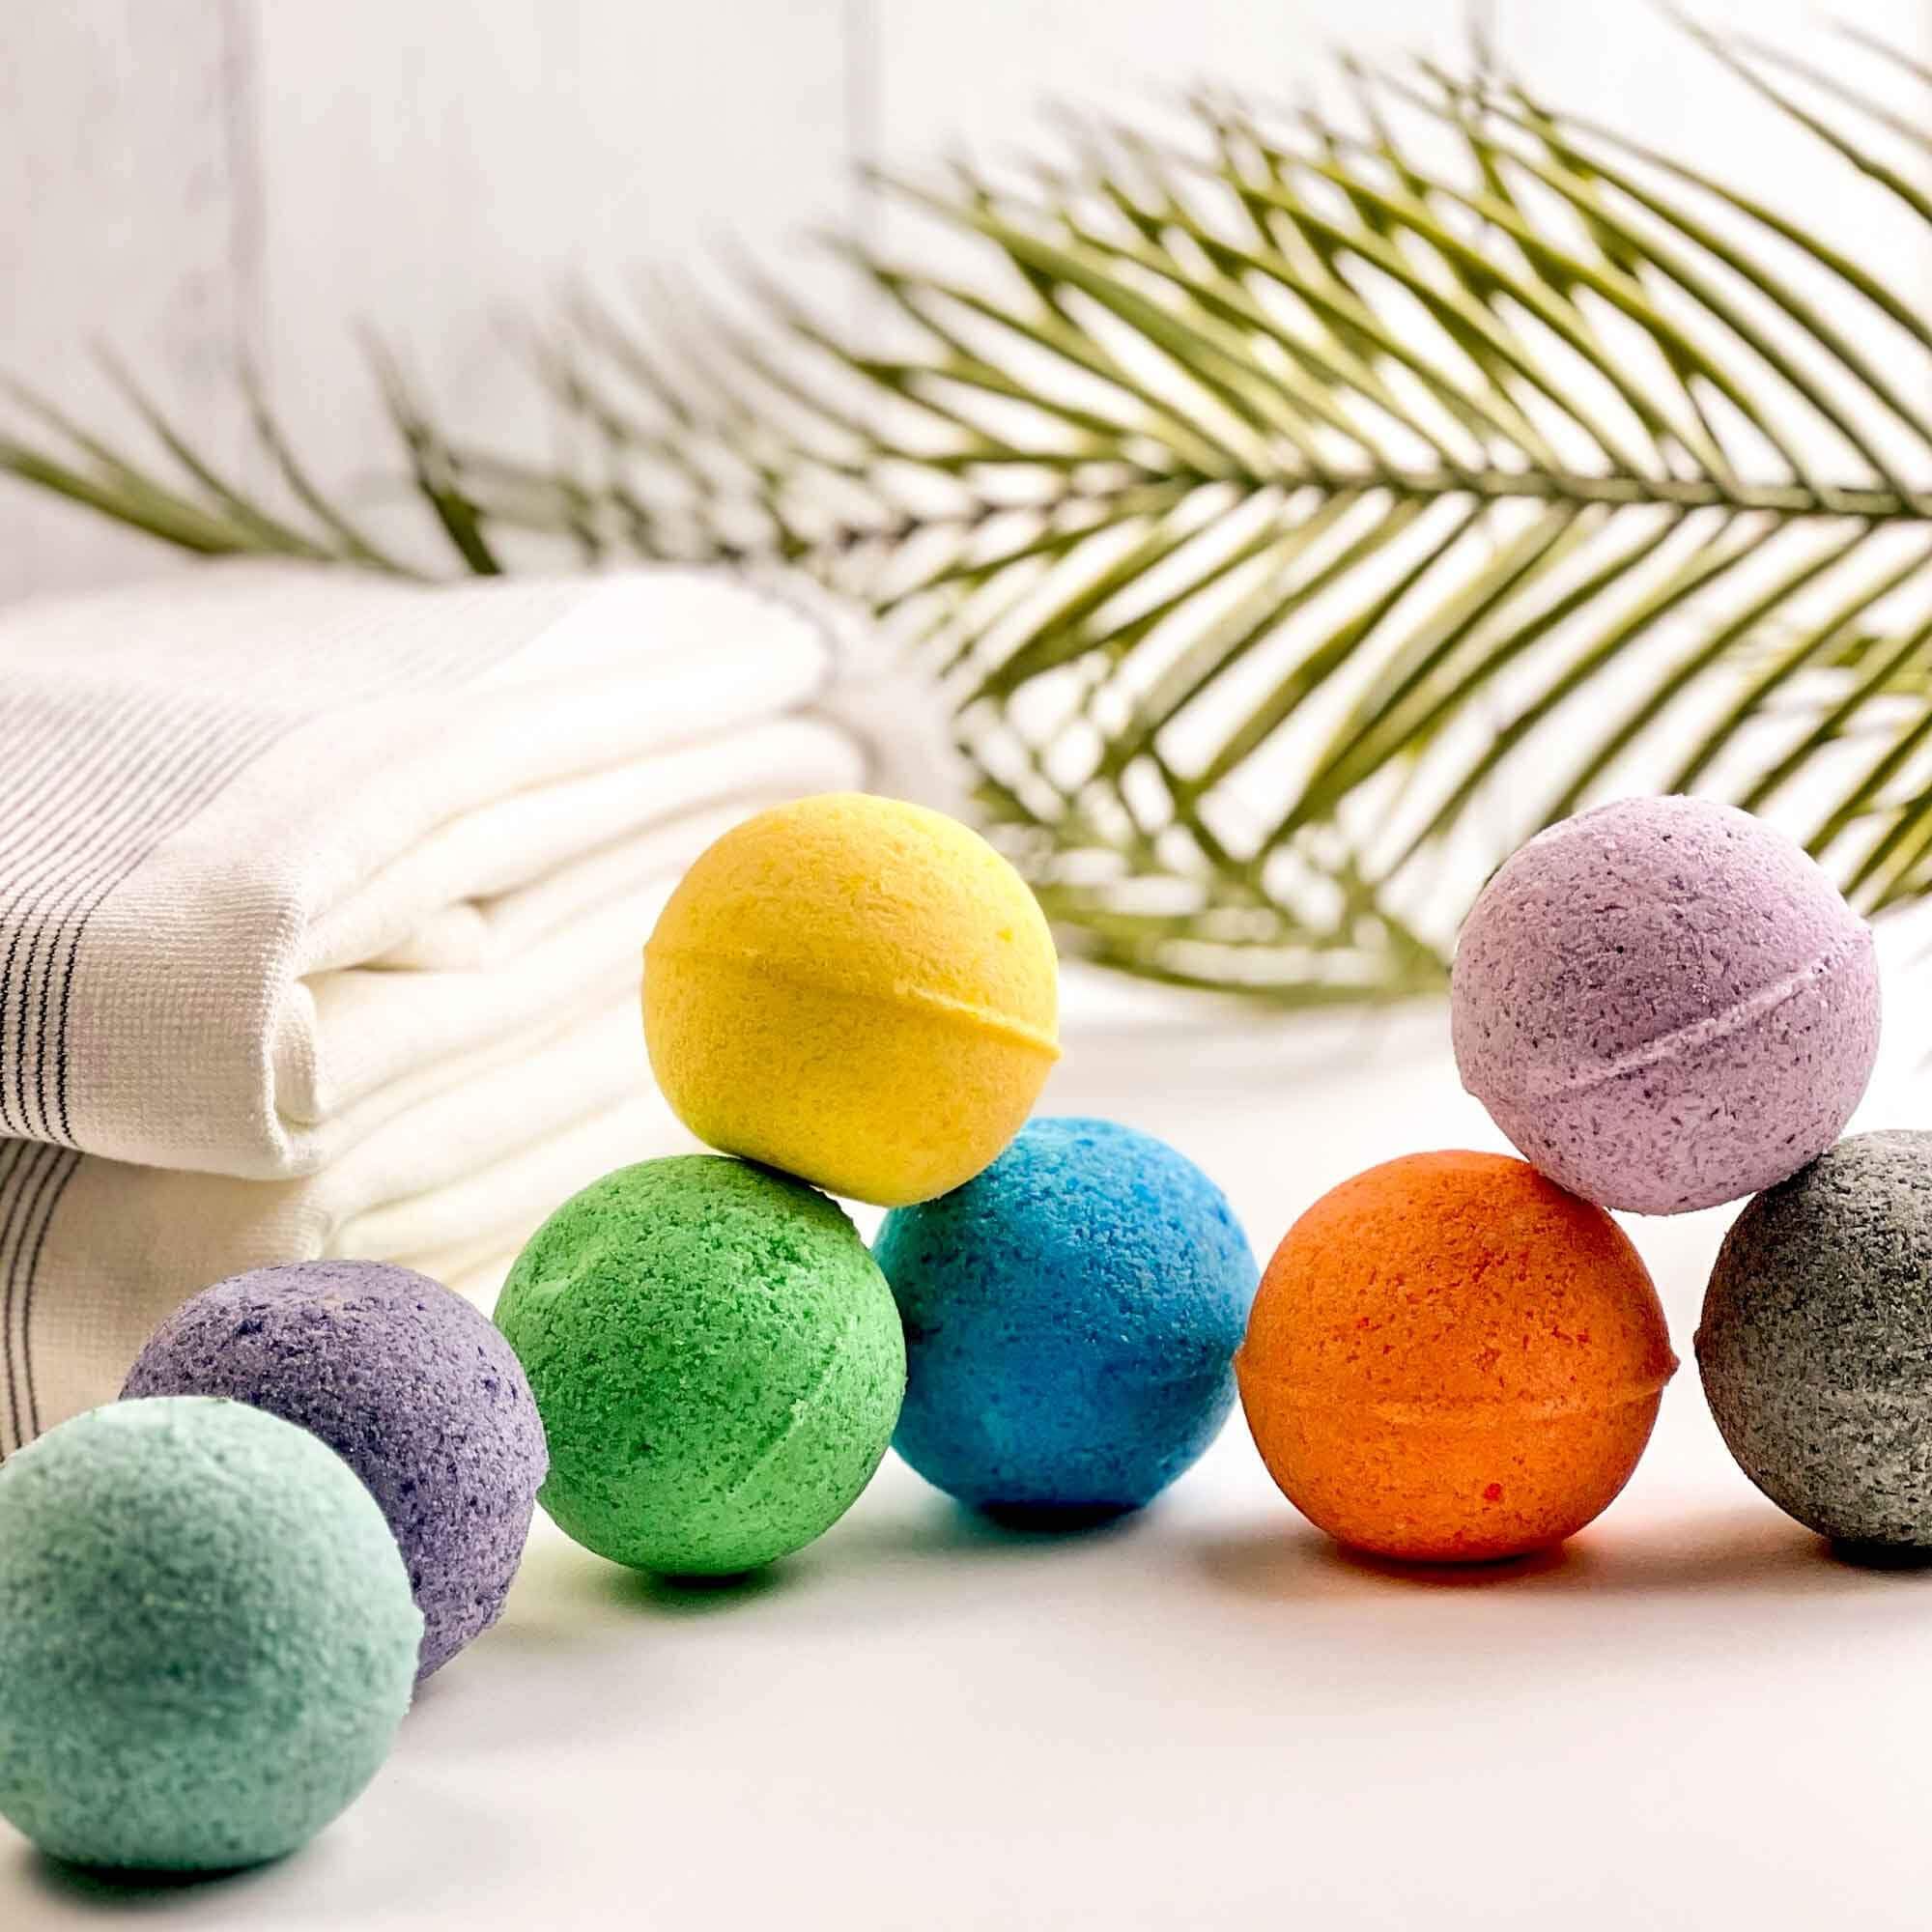 Relax in Paradise with our Hibiscus Palm Bath Bombs